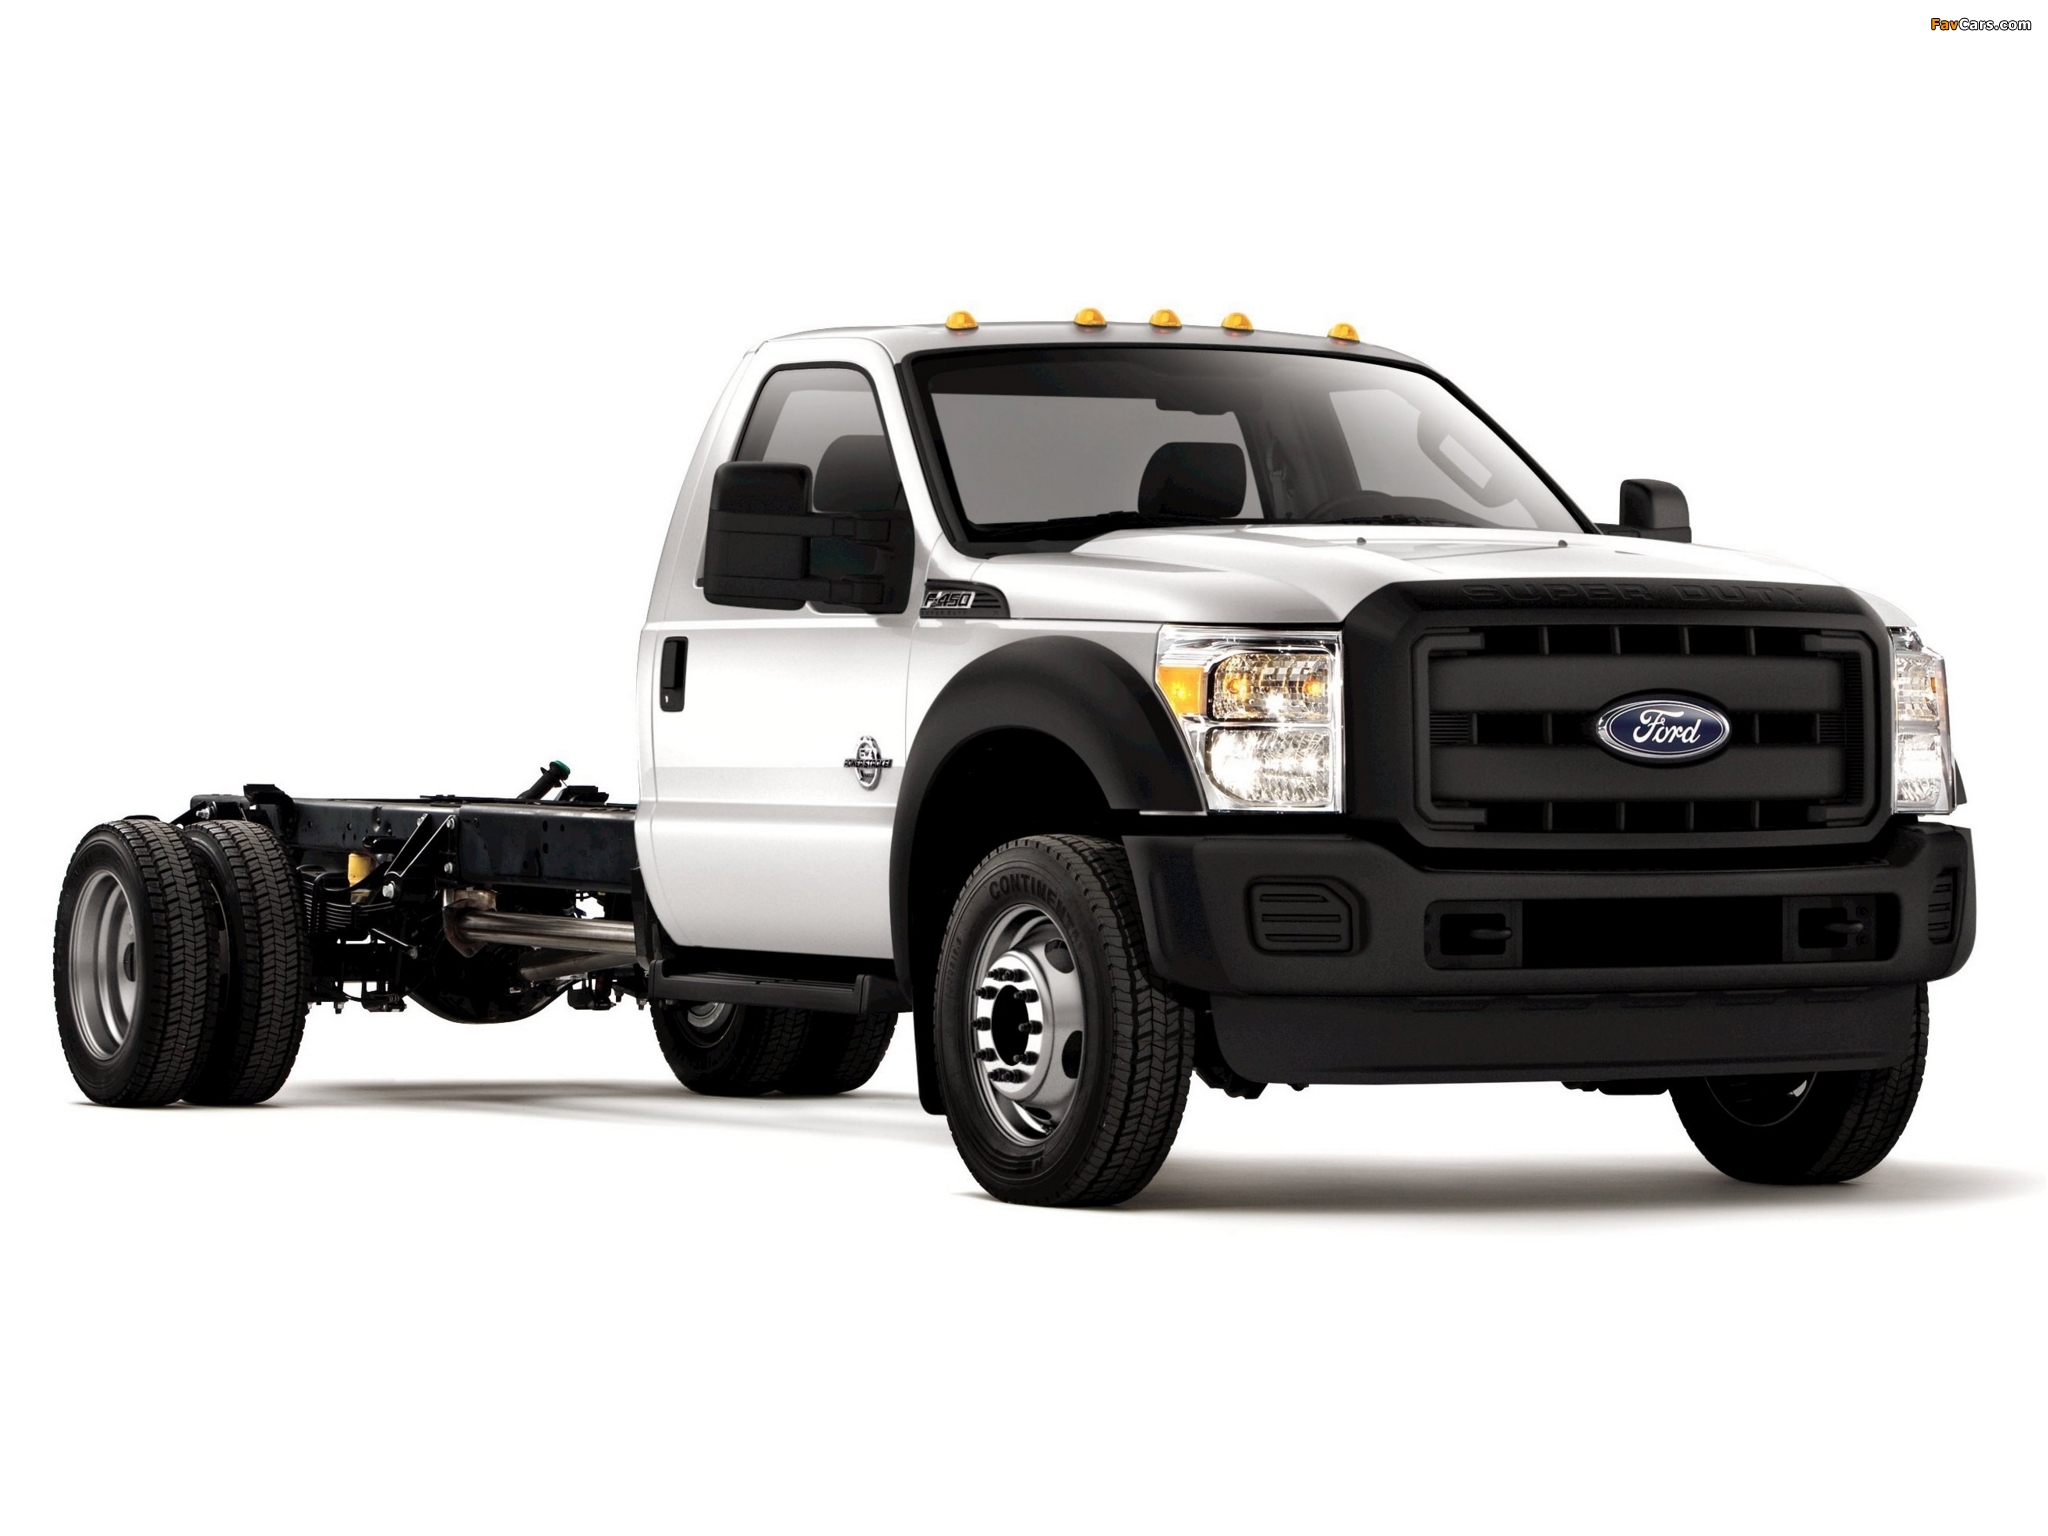 Ford F 450 Super Duty 2010 Wallpapers 2048x1536